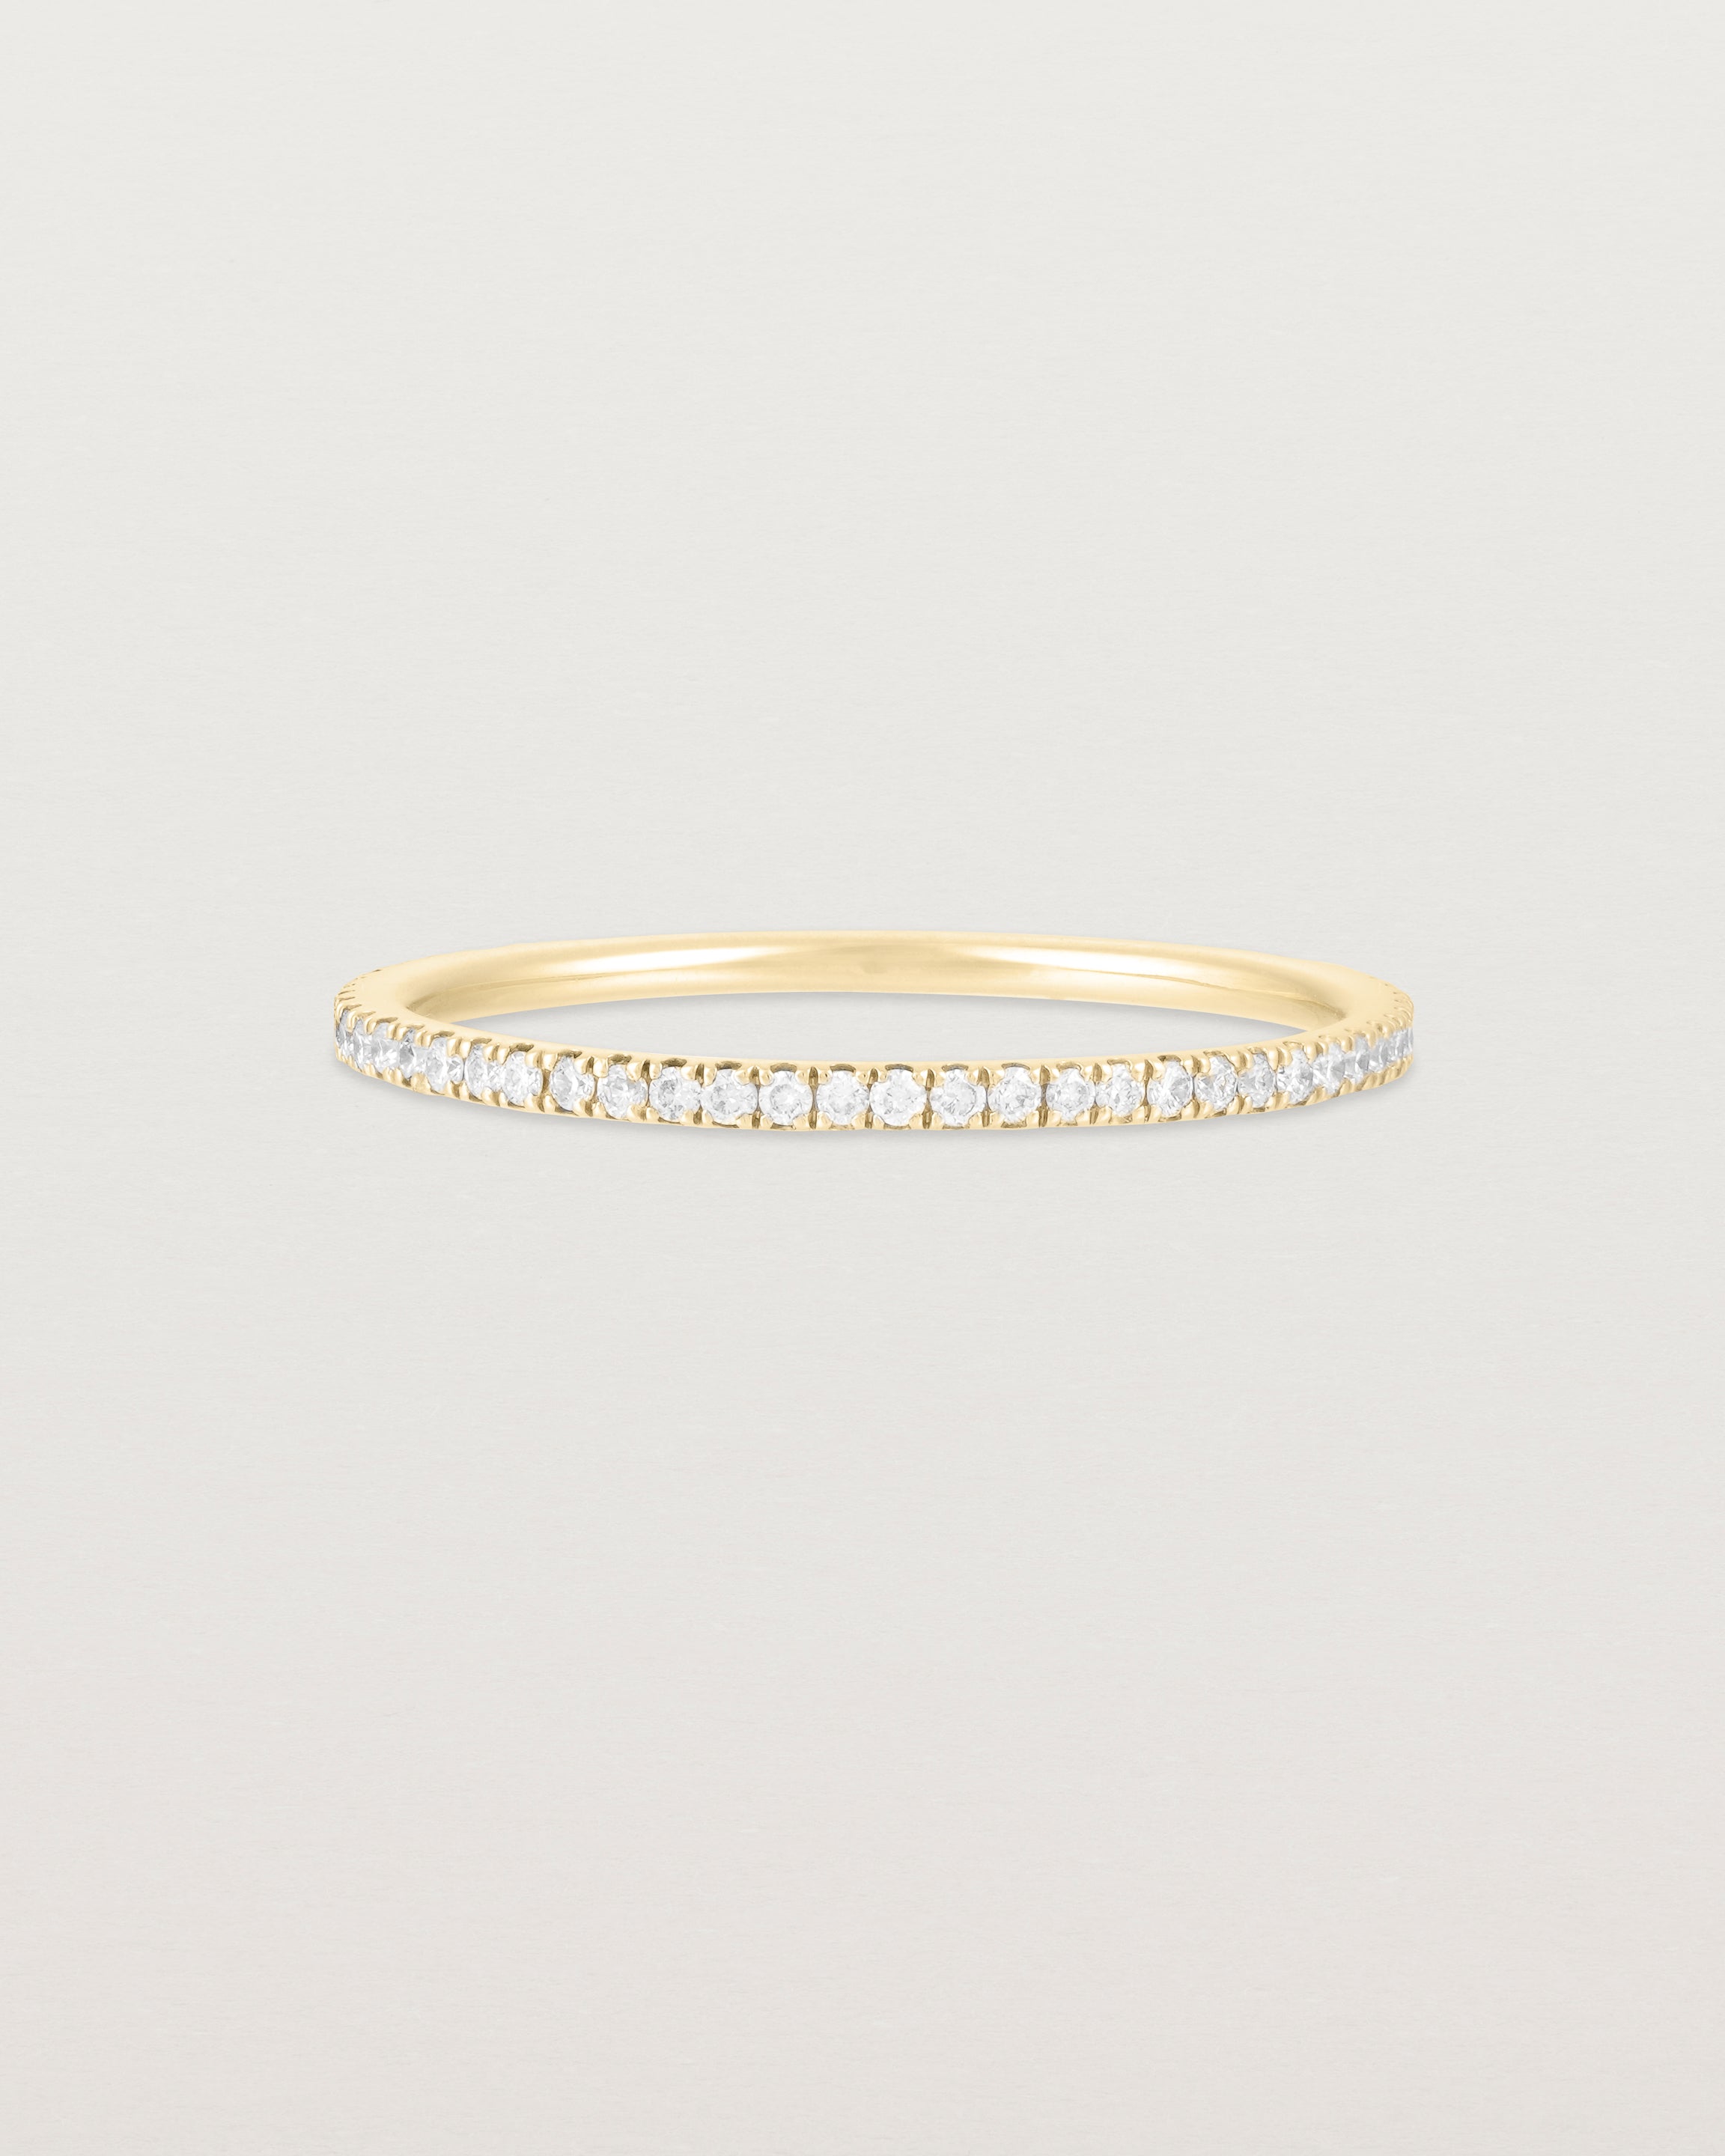 A full yellow gold band featuring white diamonds